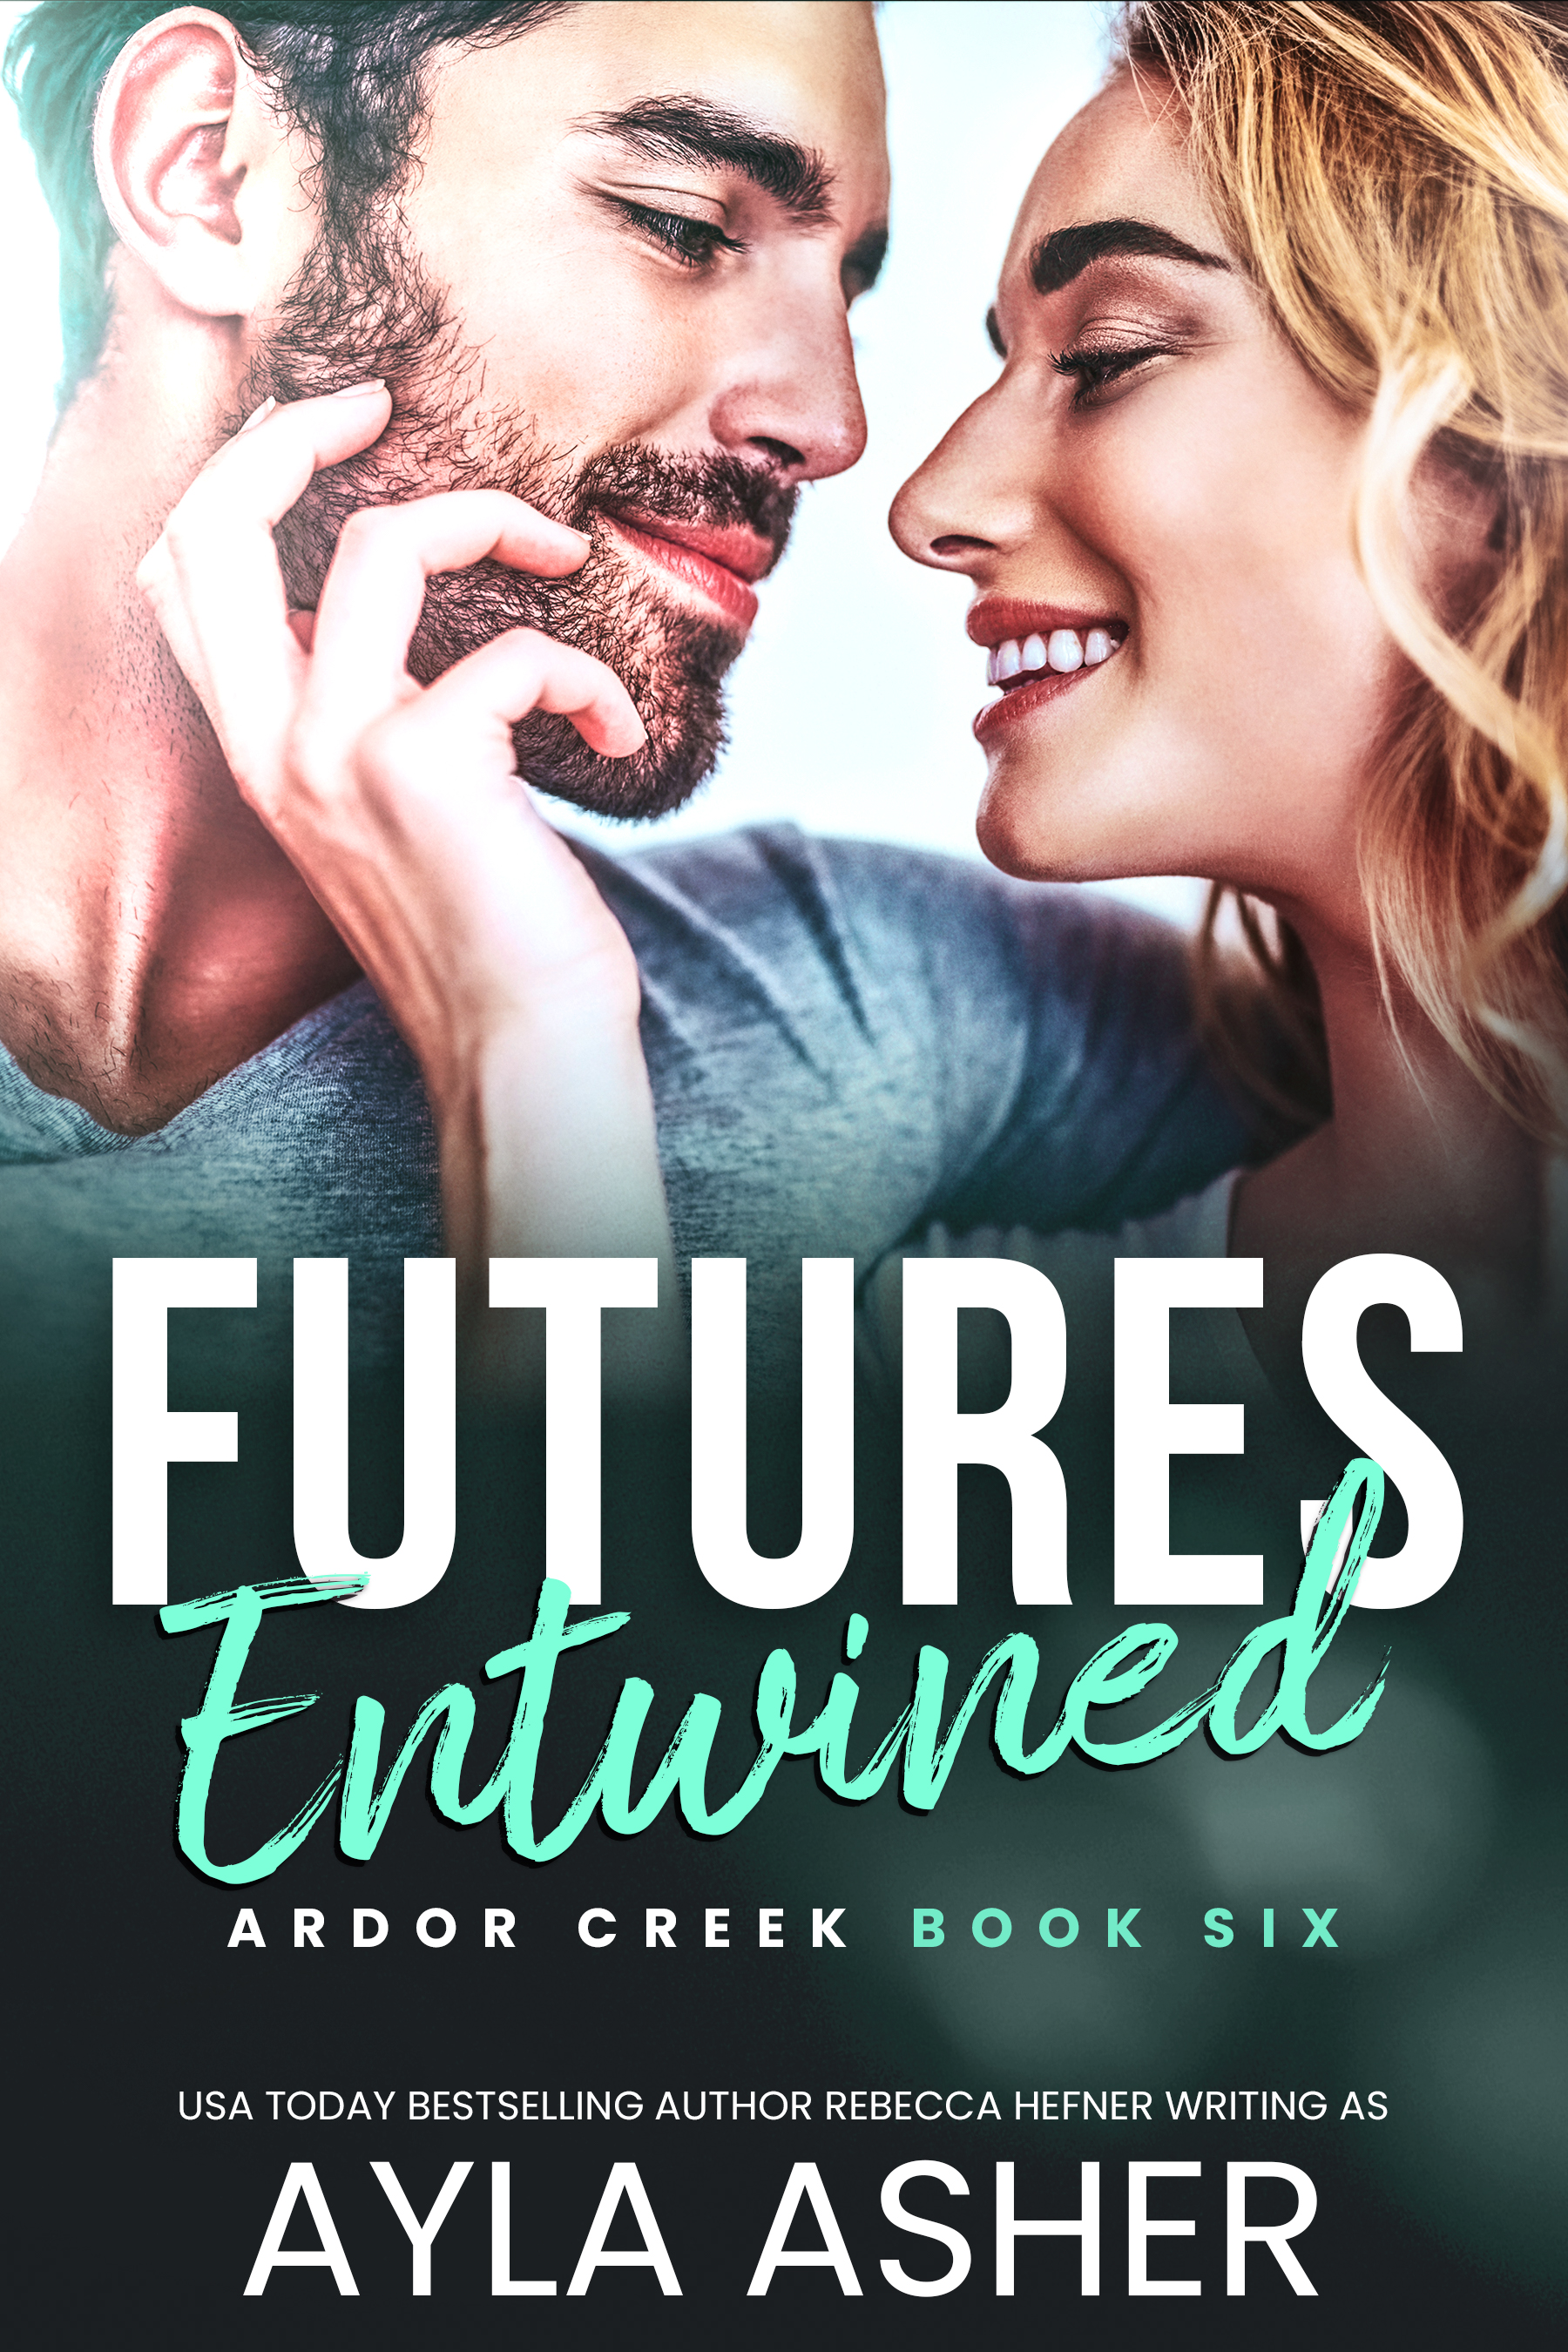 Futures Entwined by Ayla Asher - Steamy Small Town Romance